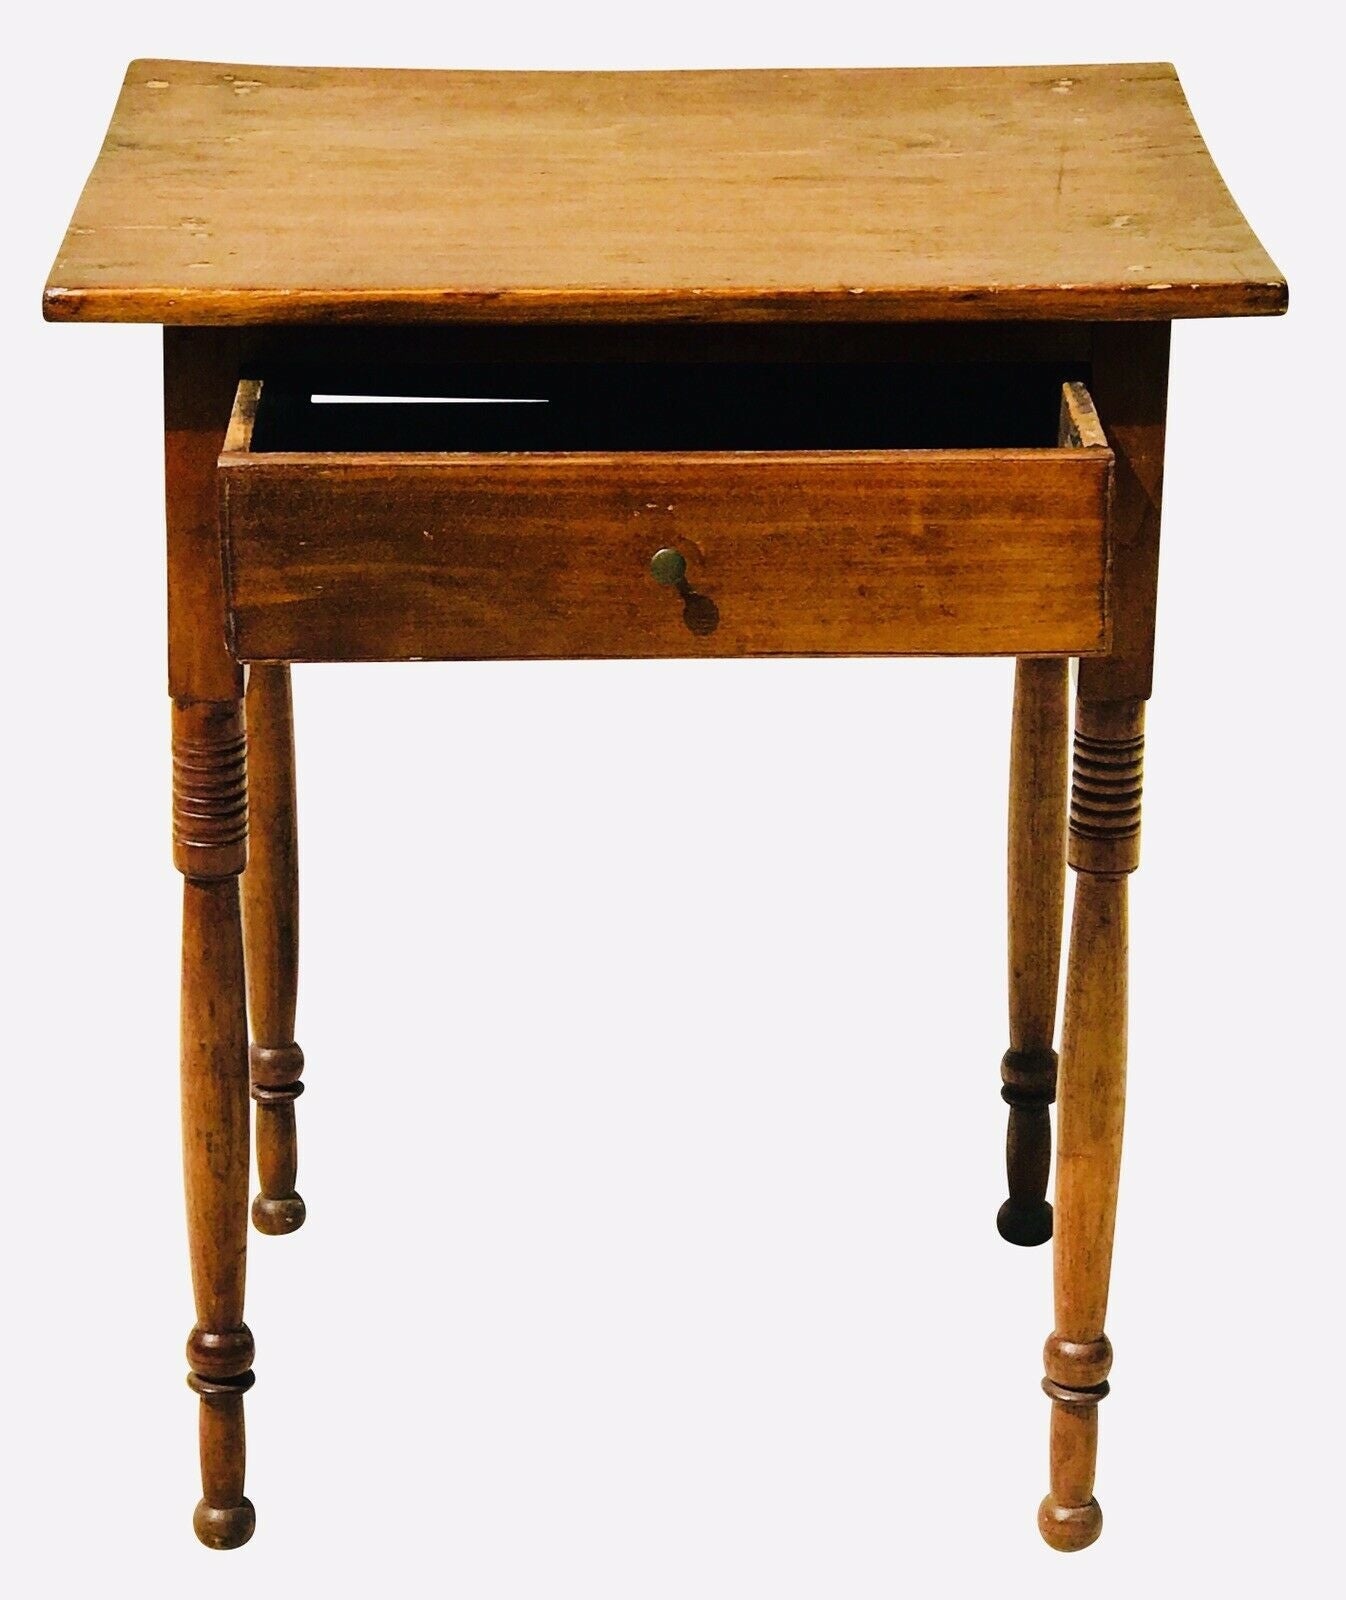 19TH C ANTIQUE SHERATON PERIOD COUNTRY PINE WORK TABLE / NIGHT STAND